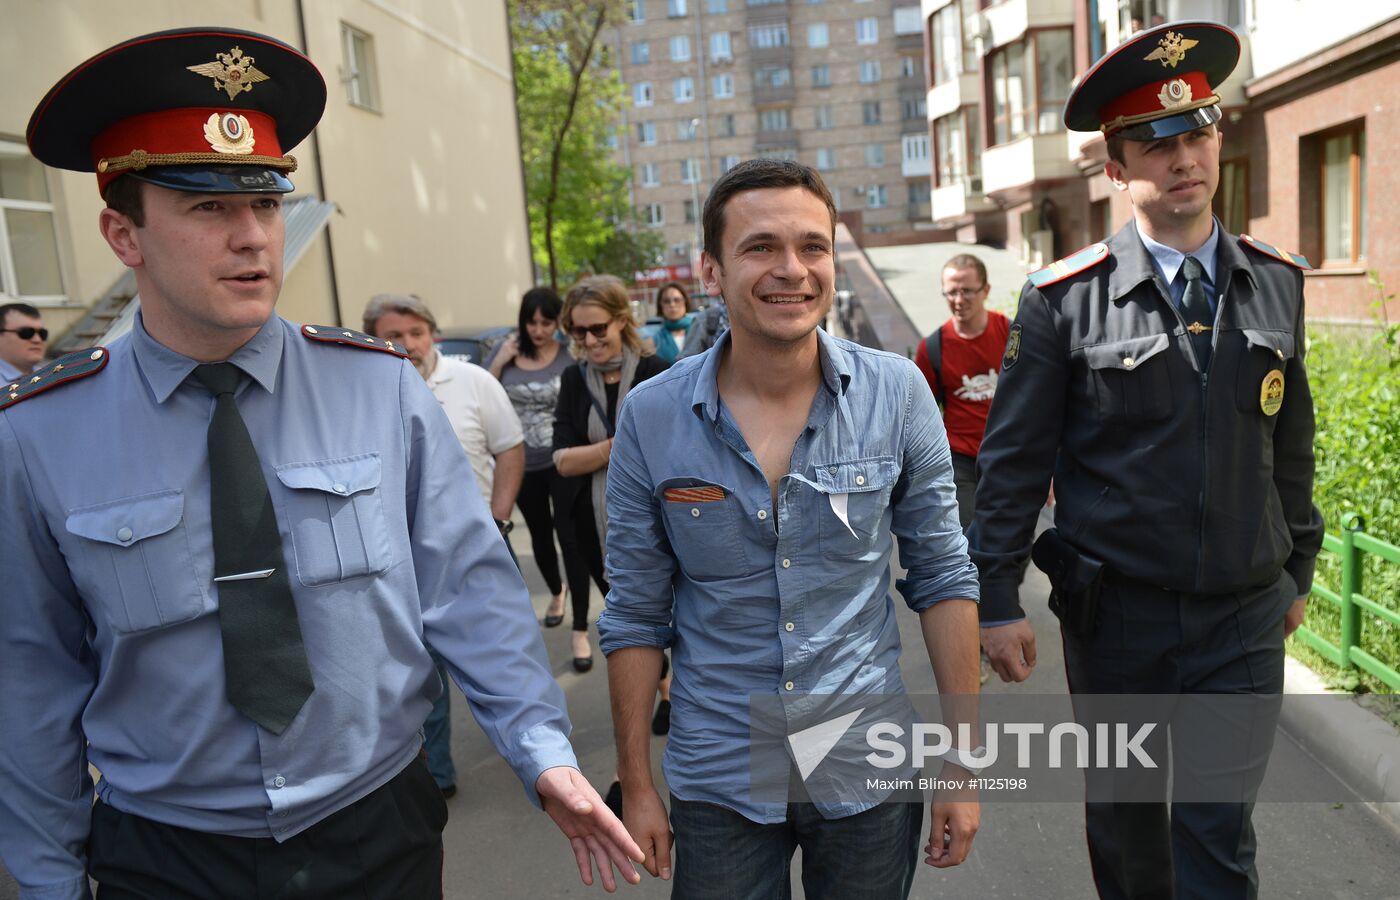 Opposition leader Ilya Yashin brought before Moscow court